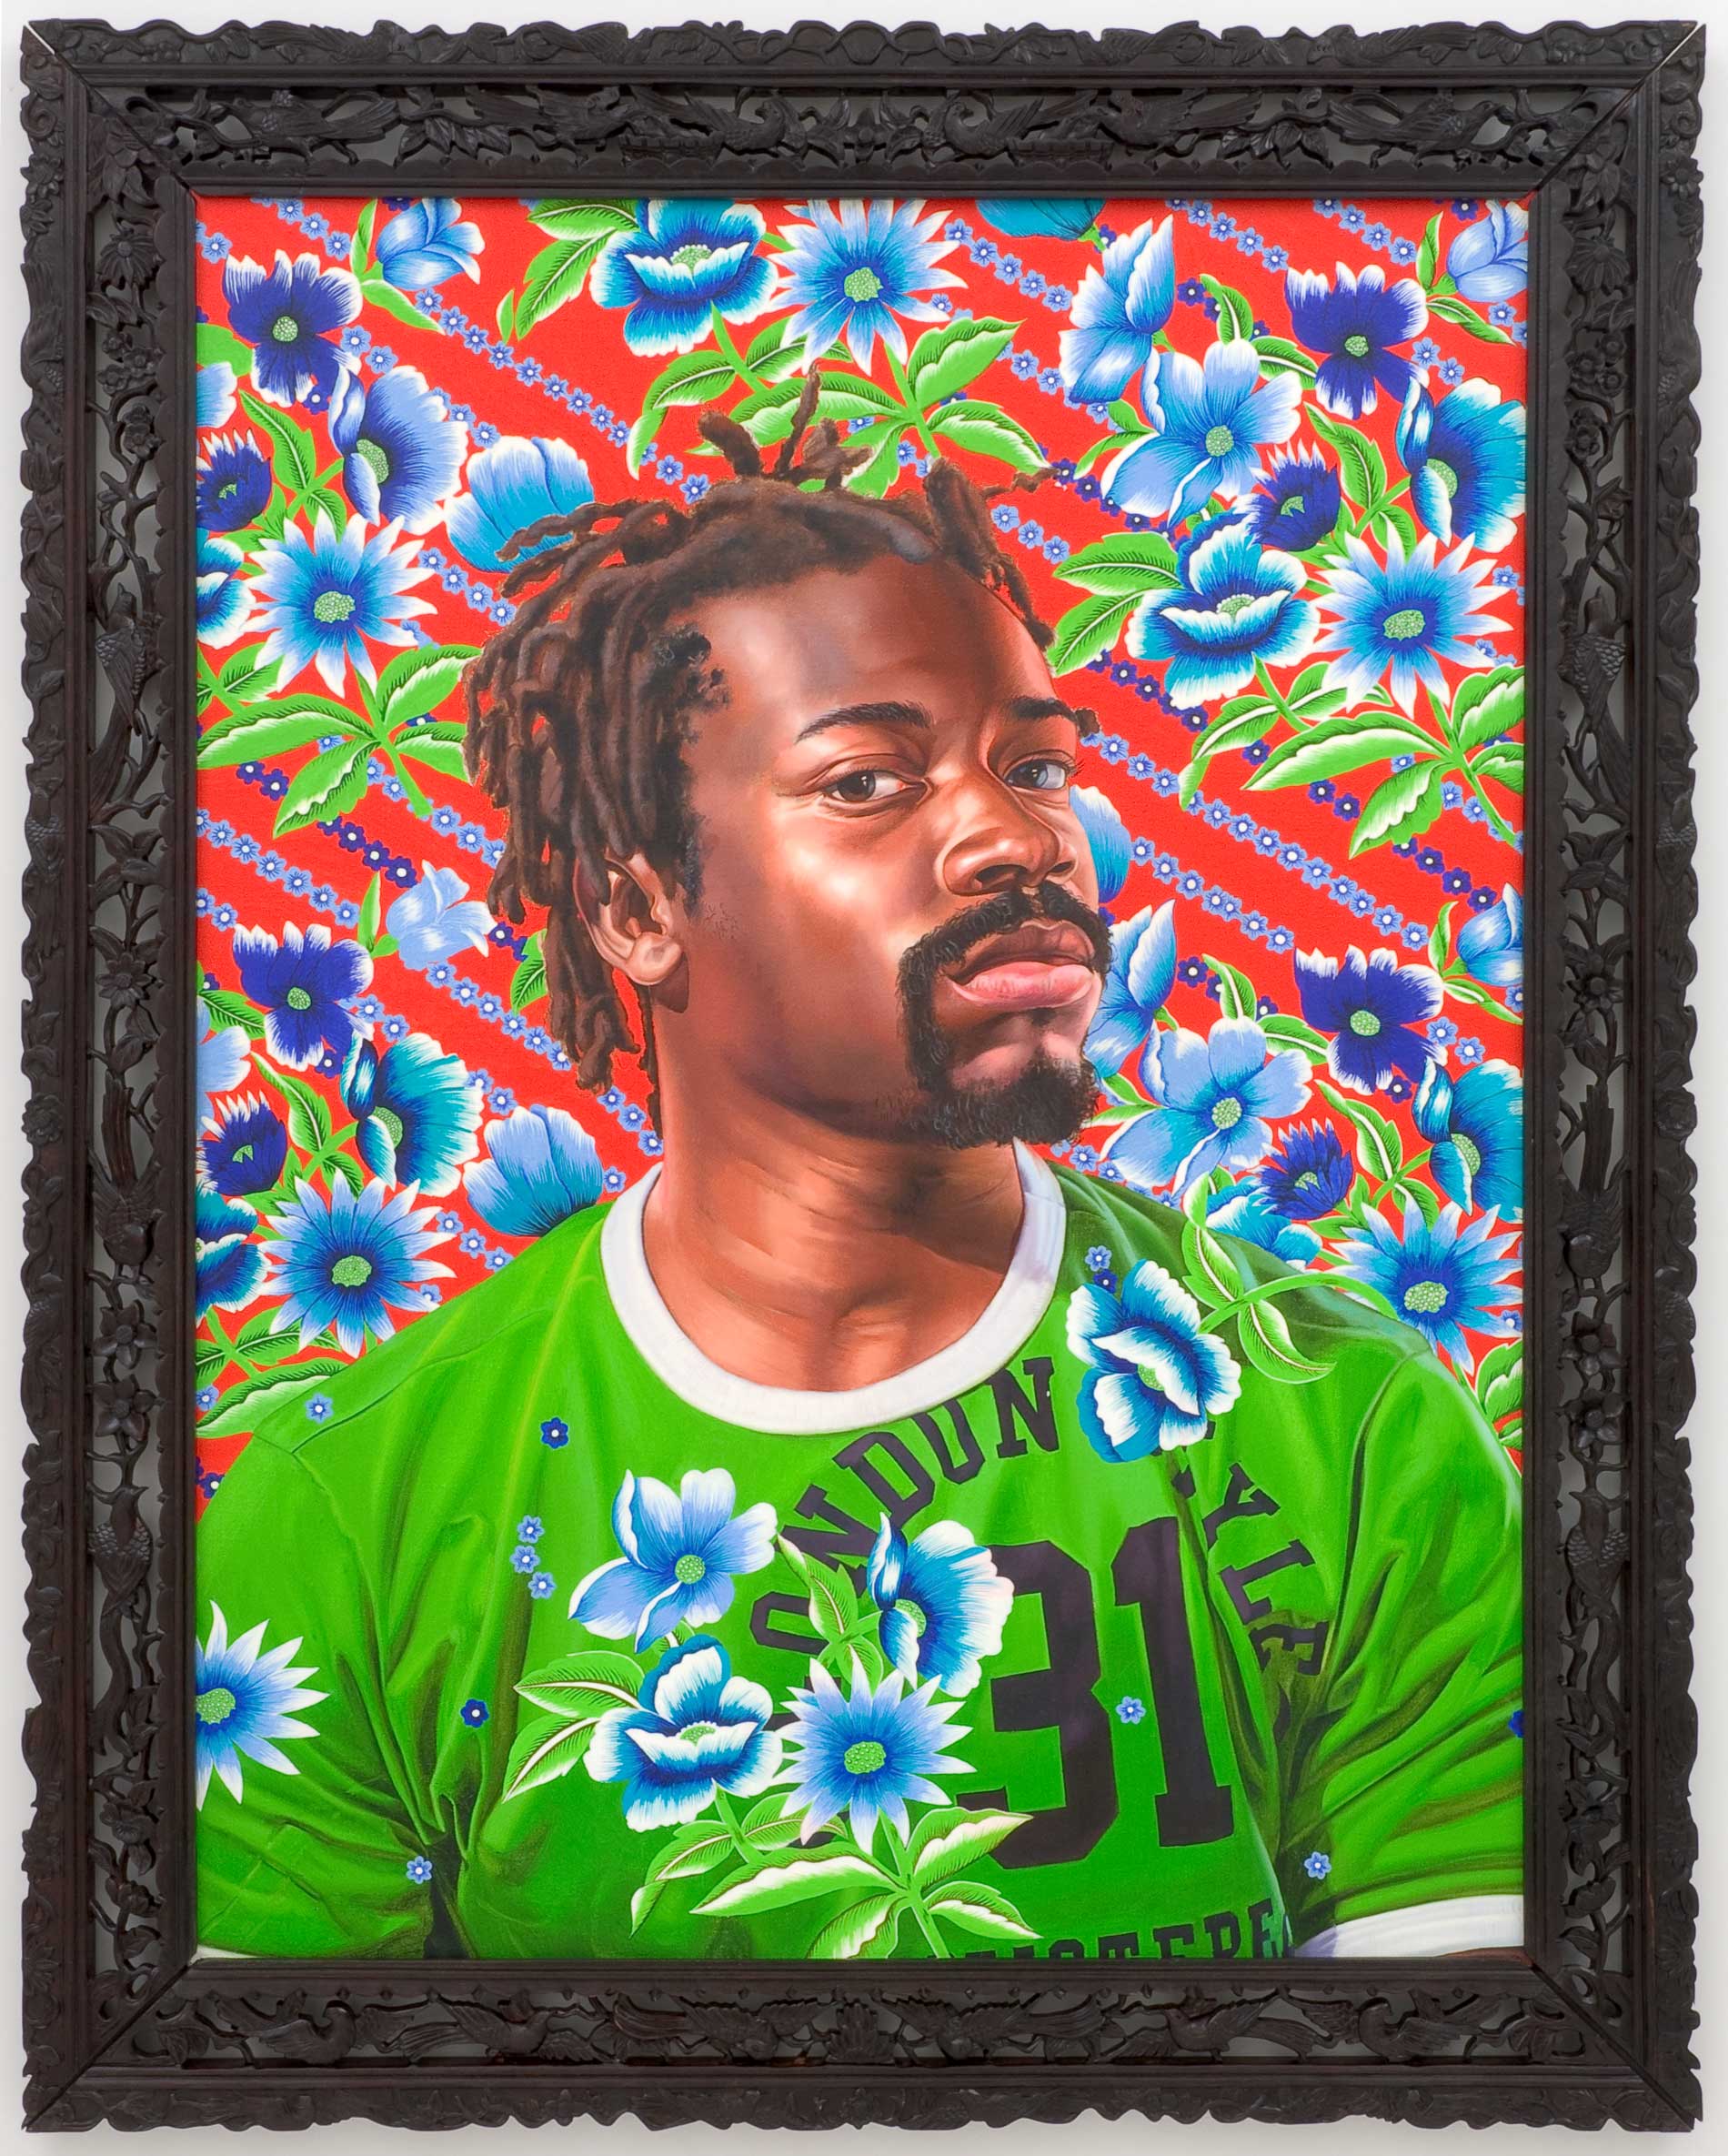 Kehinde Wiley | The World Stage: Brazil | Vagner Rodrigues Gomes, 2009 Oil on Canvas. | 4